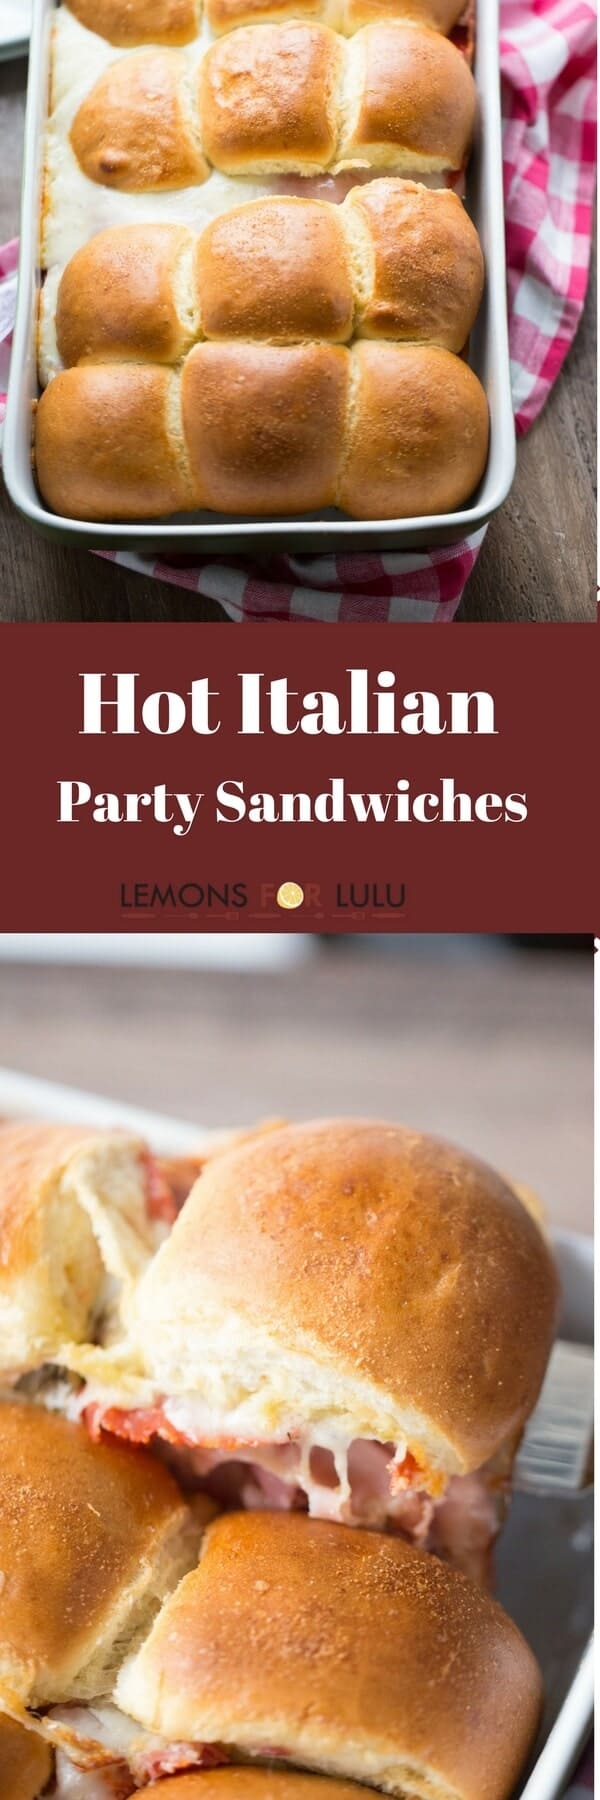 Party sandwiches are game a day great! These hot Italian sandwiches are going to be a hit wherever they are served!